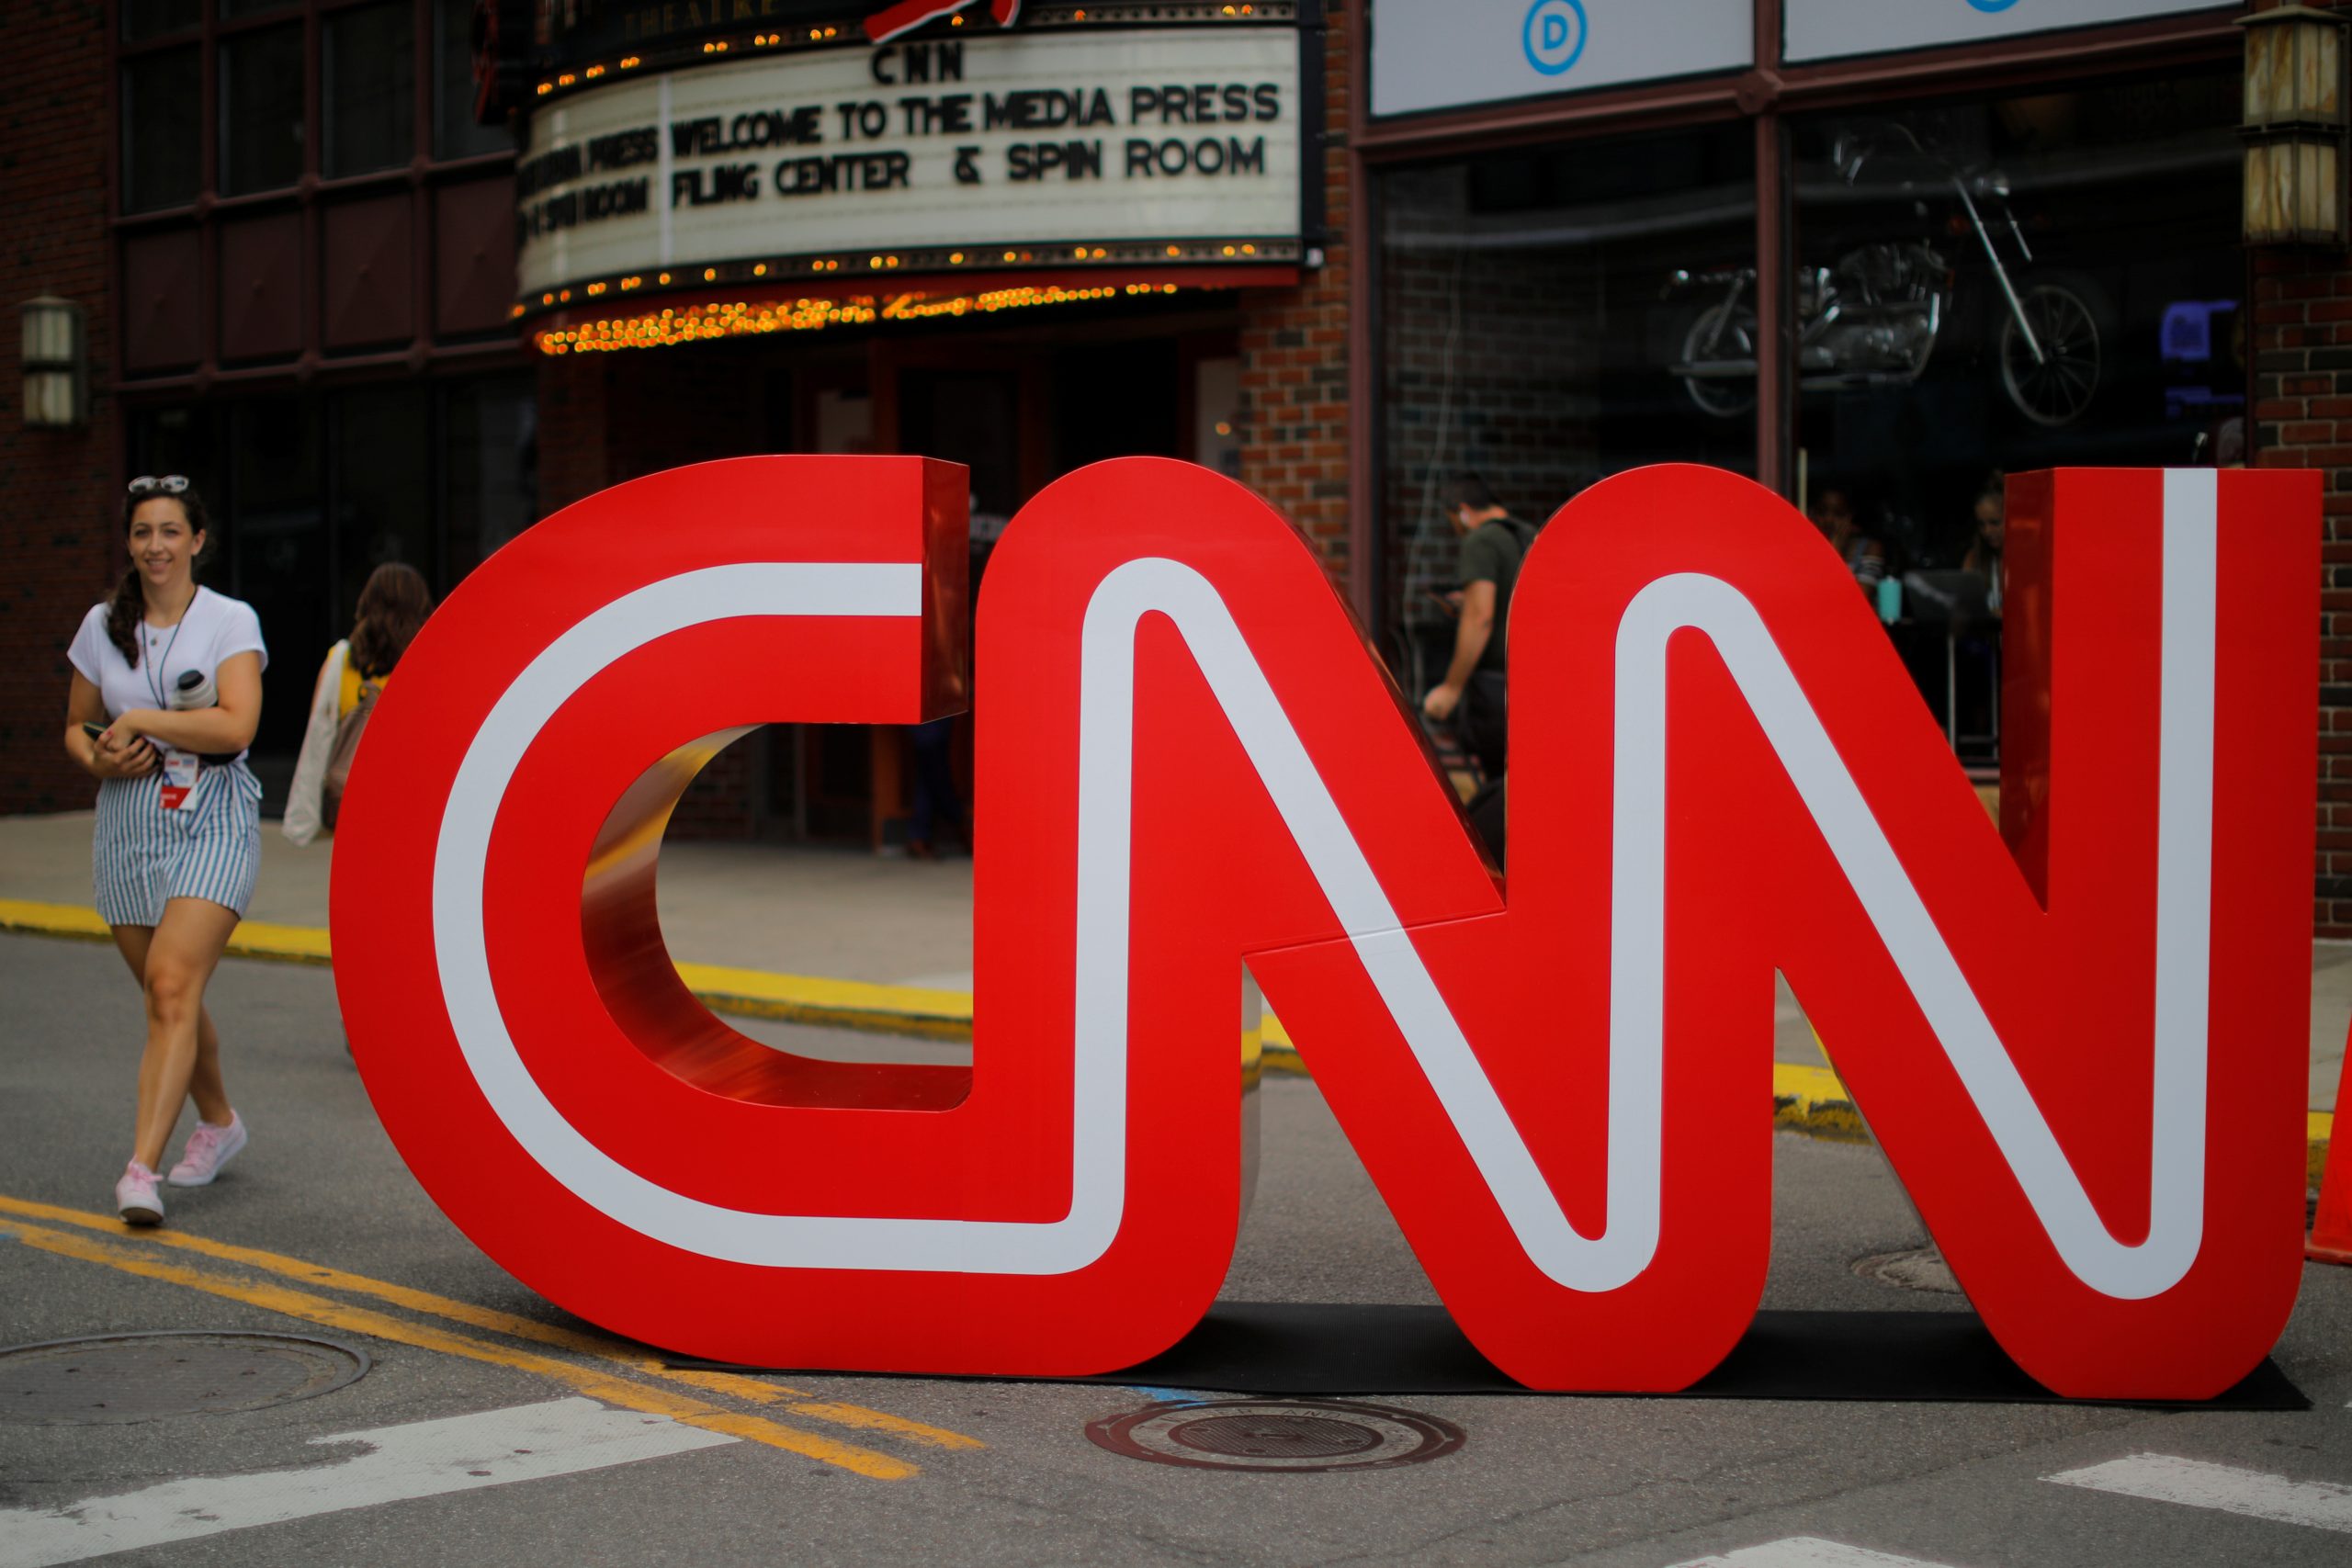 CNN is the most polarizing news source, according to a recent poll, as the network shifts its focus.